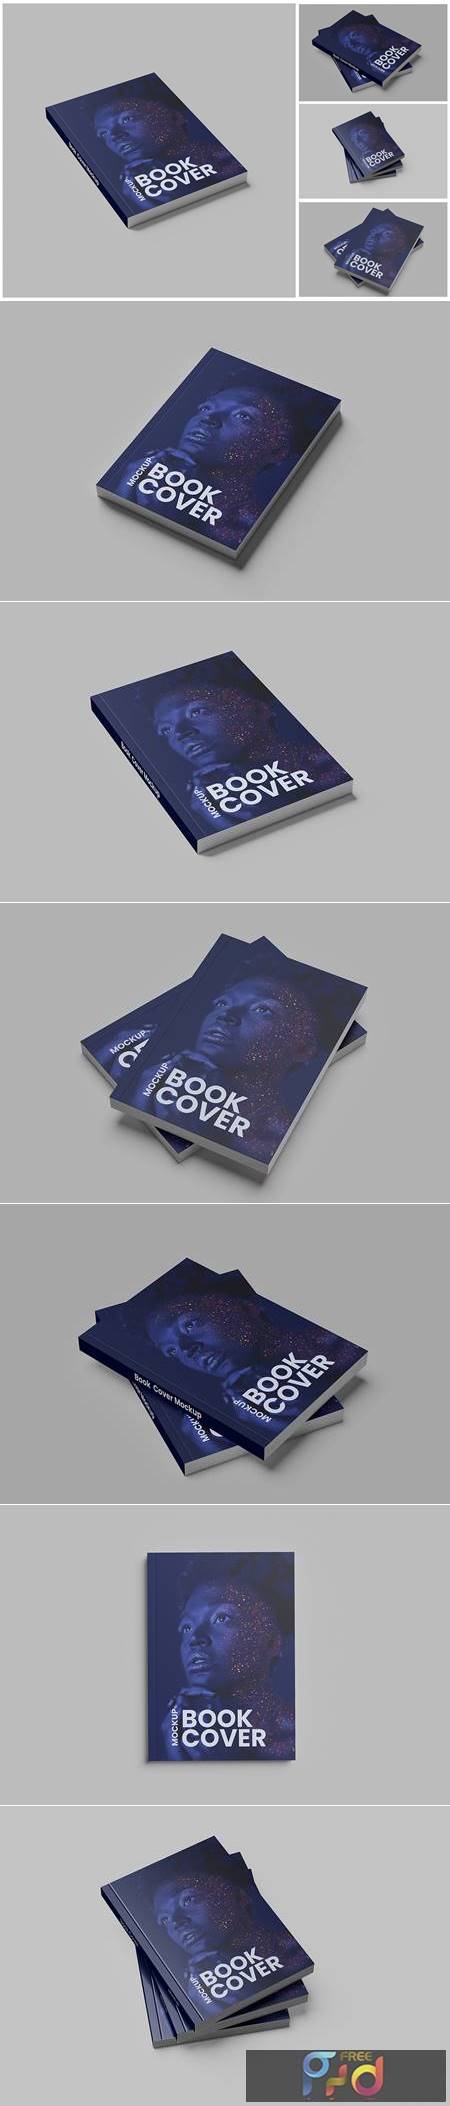 Book Cover Mockup X5LLF4S 1